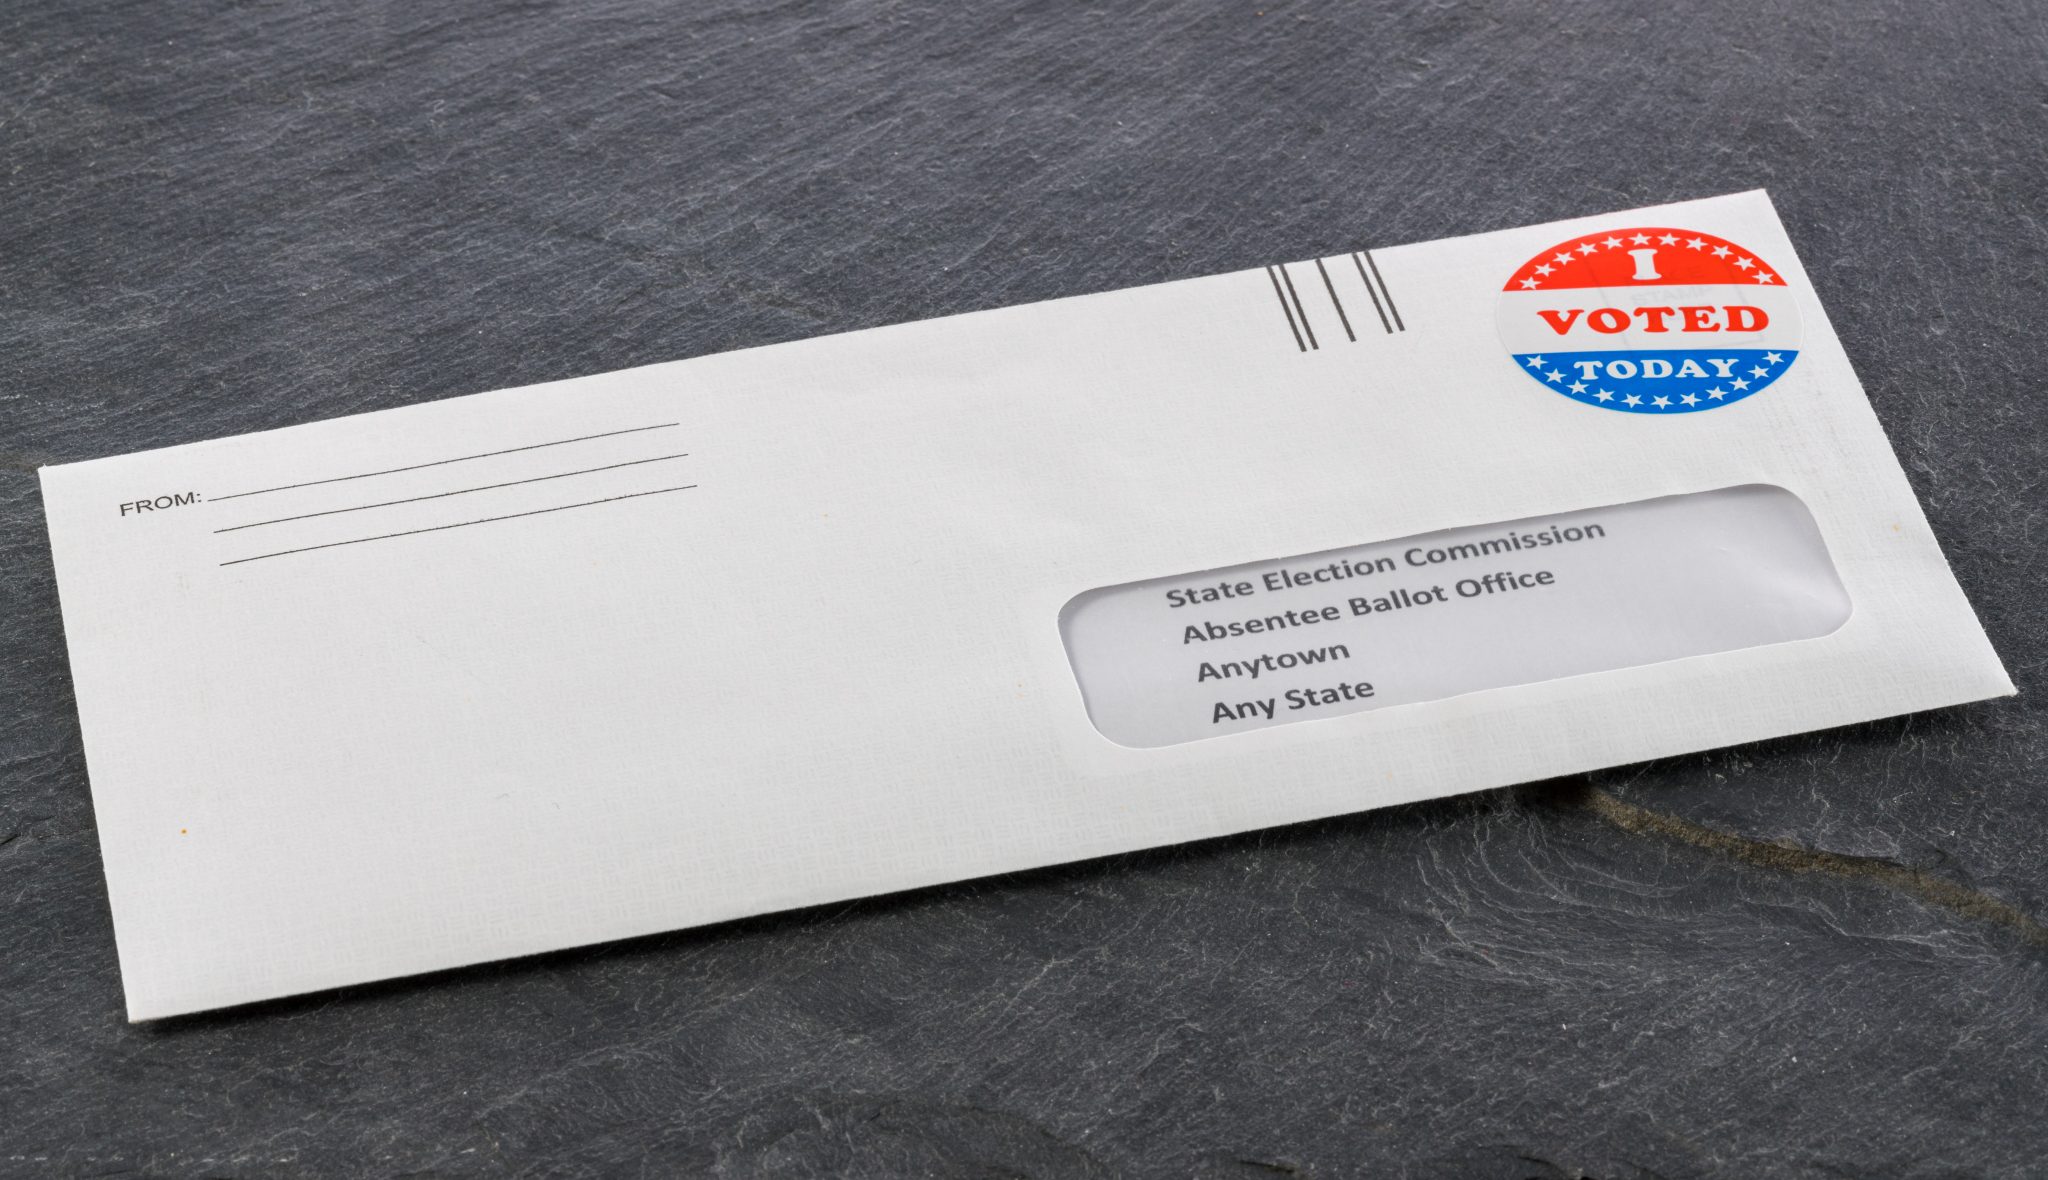 Envelope addressed to state election committe for voting by mail